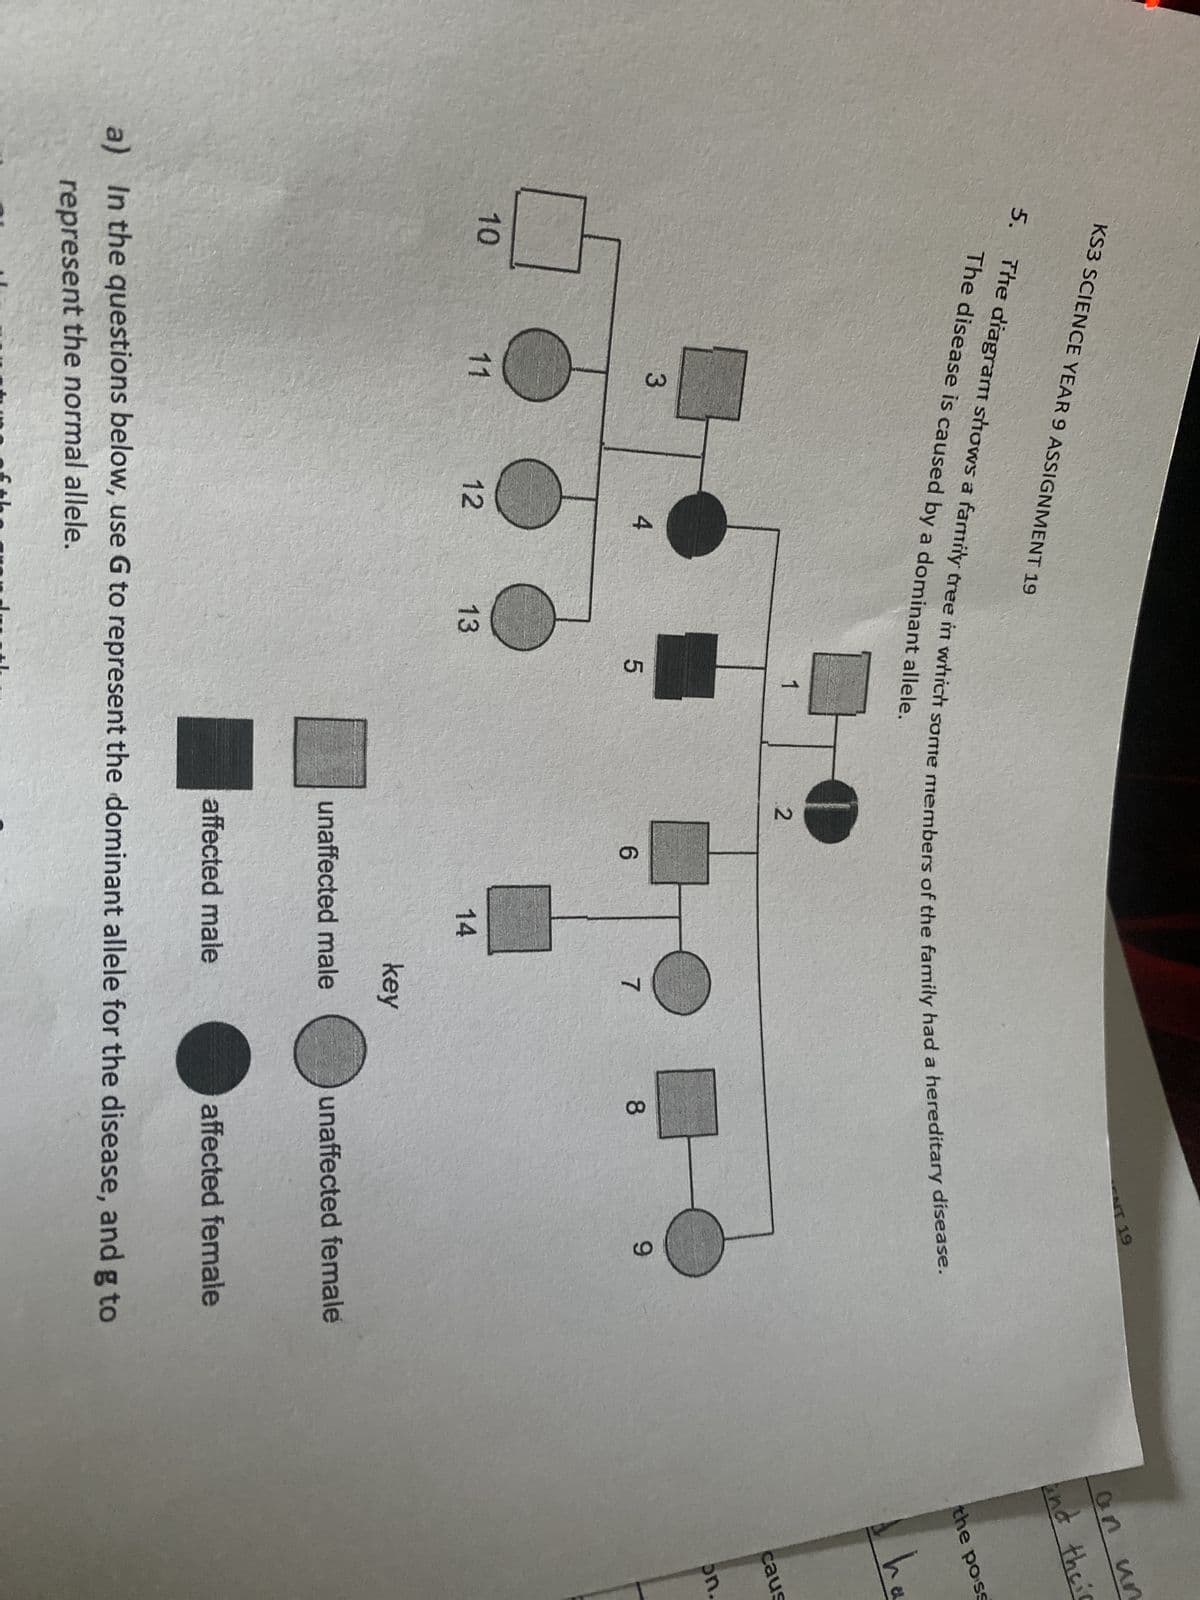 KS3 SCIENCE YEAR 9 ASSIGNMENT 19
5.
10
The diagram shows a family tree in which some members of the family had a hereditary disease.
The disease is caused by a dominant allele.
3
11
12
4
13
hom
5
1
2
6
14
7
key
unaffected male
affected male
ENT 19
8
9
unaffected female
affected female
a) In the questions below, use G to represent the dominant allele for the disease, and g to
represent the normal allele.
an un
and theic
the poss
ho
caus
on.